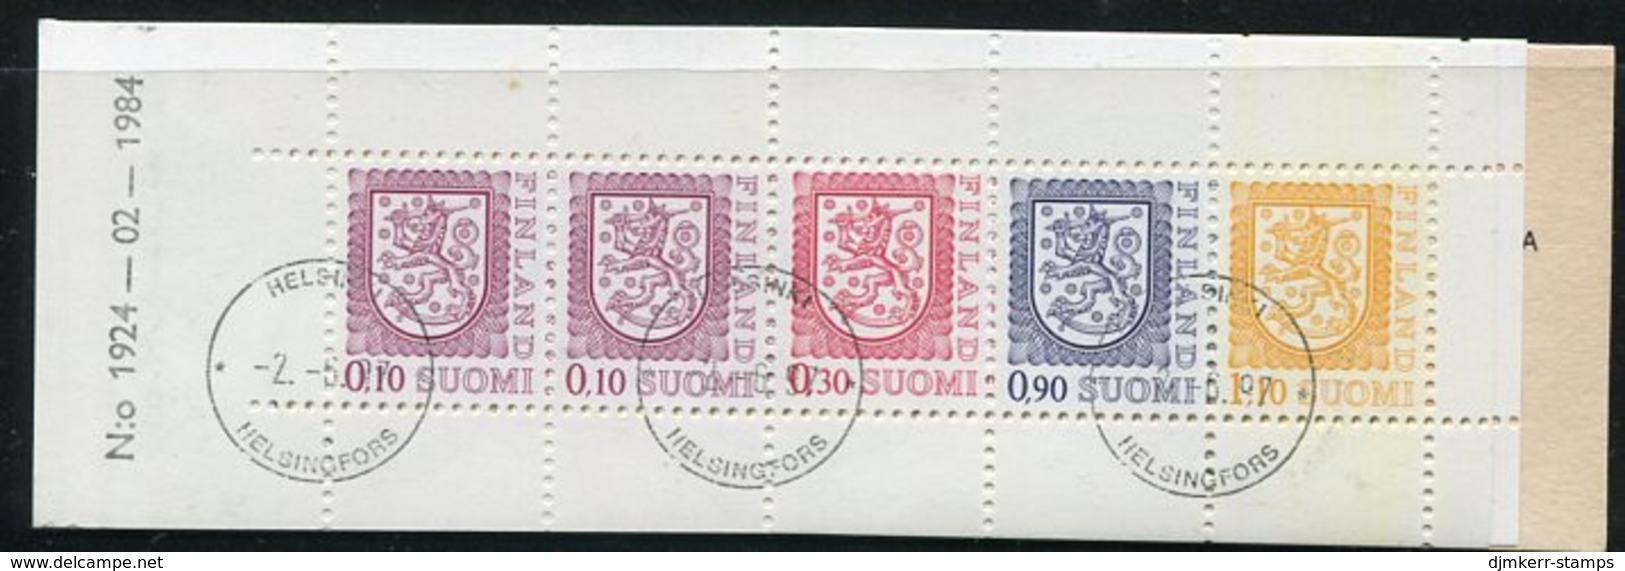 FINLAND 1980 Lion Definitive Type II 5 Mk. Complete, Cancelled.  Michel MH 12 II - Cuadernillos